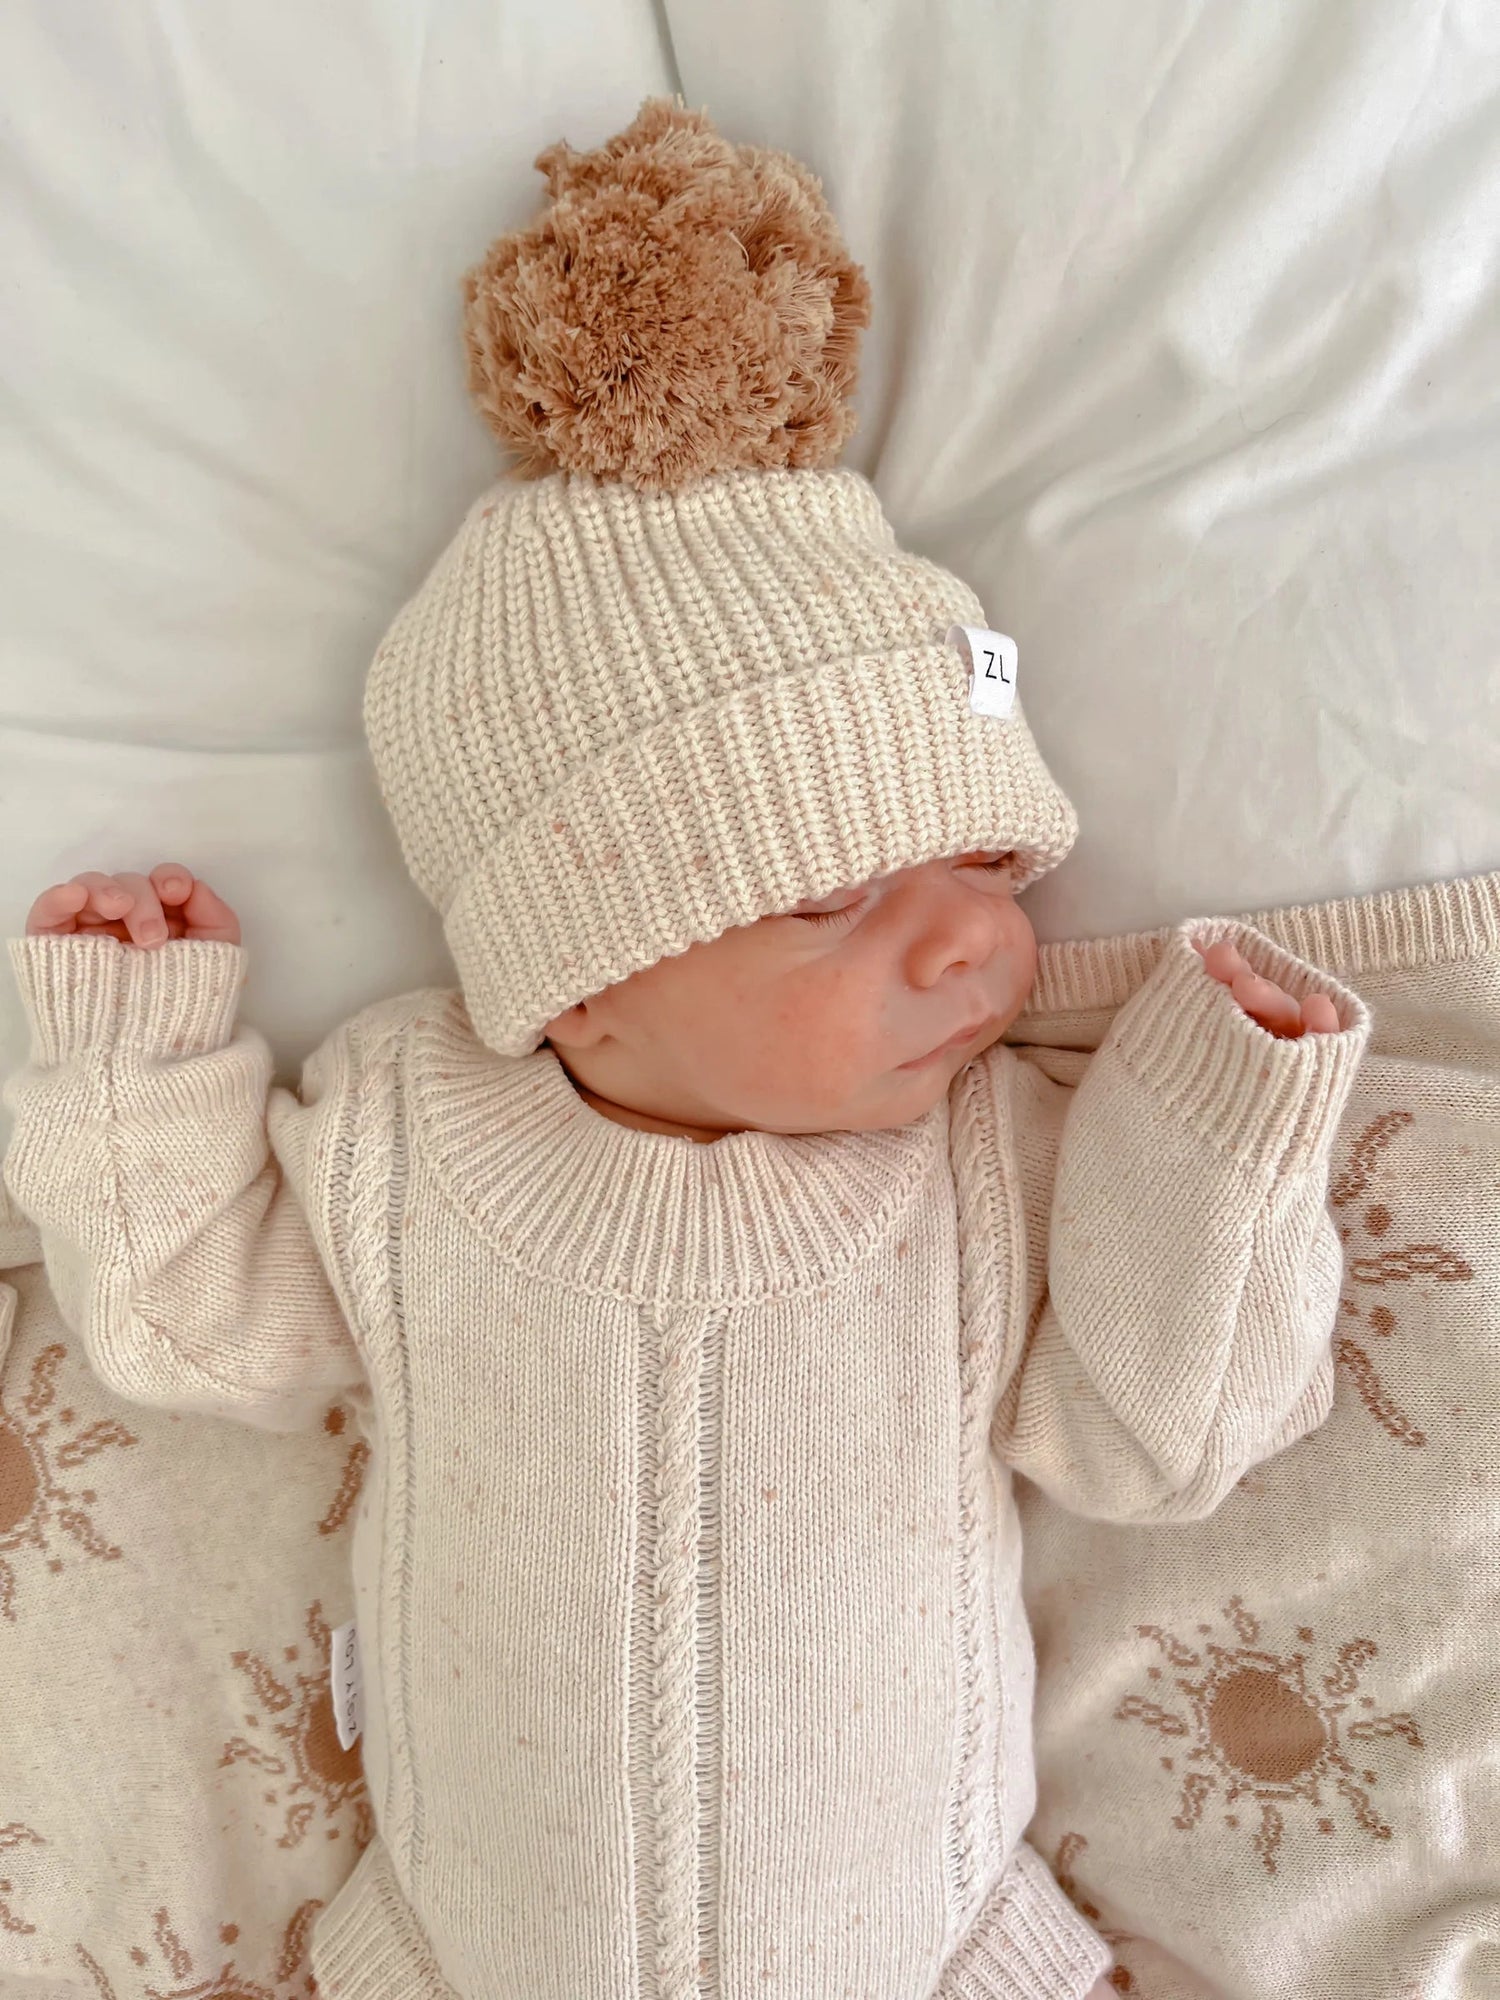 ZIGGY LOU | HEIRLOOM ROMPER - BISCOTTI FLECK NB by ZIGGY LOU - The Playful Collective